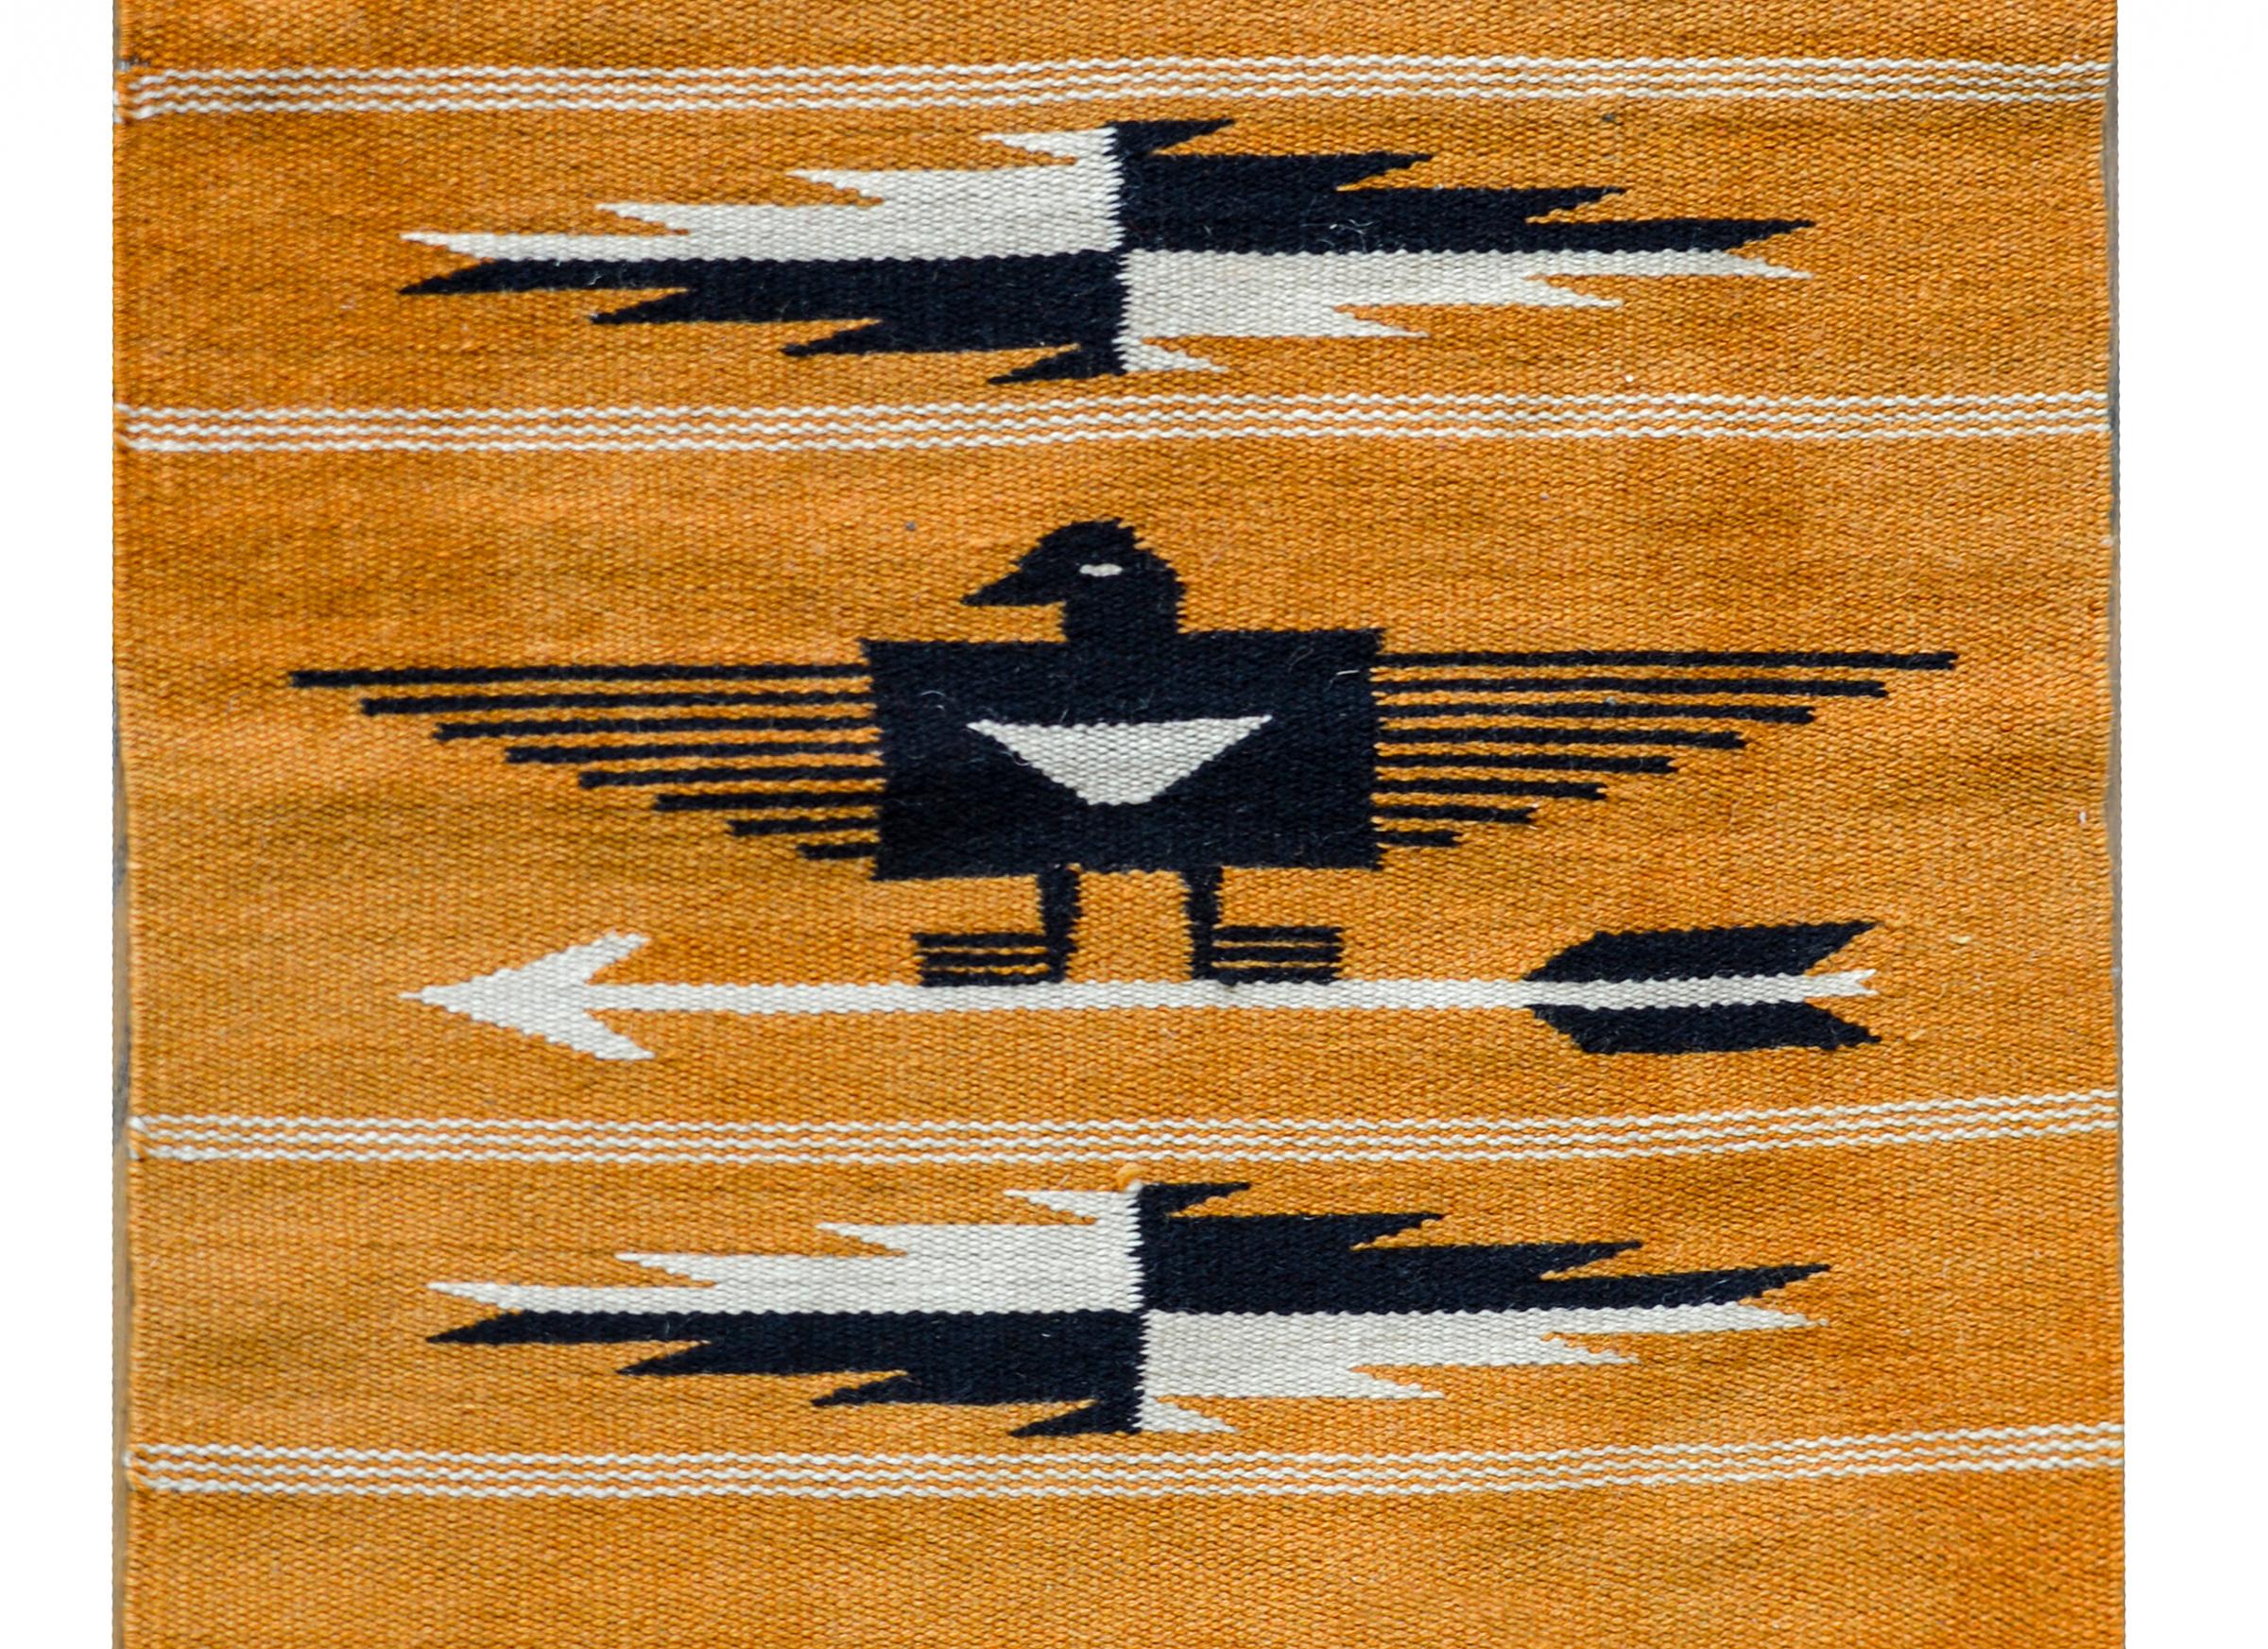 A vintage Navajo rug with large central stylized eagle standing on an arrow, and flanked by two diamond medallions, and set against a striped background woven in pink, indigo, white, and orange.